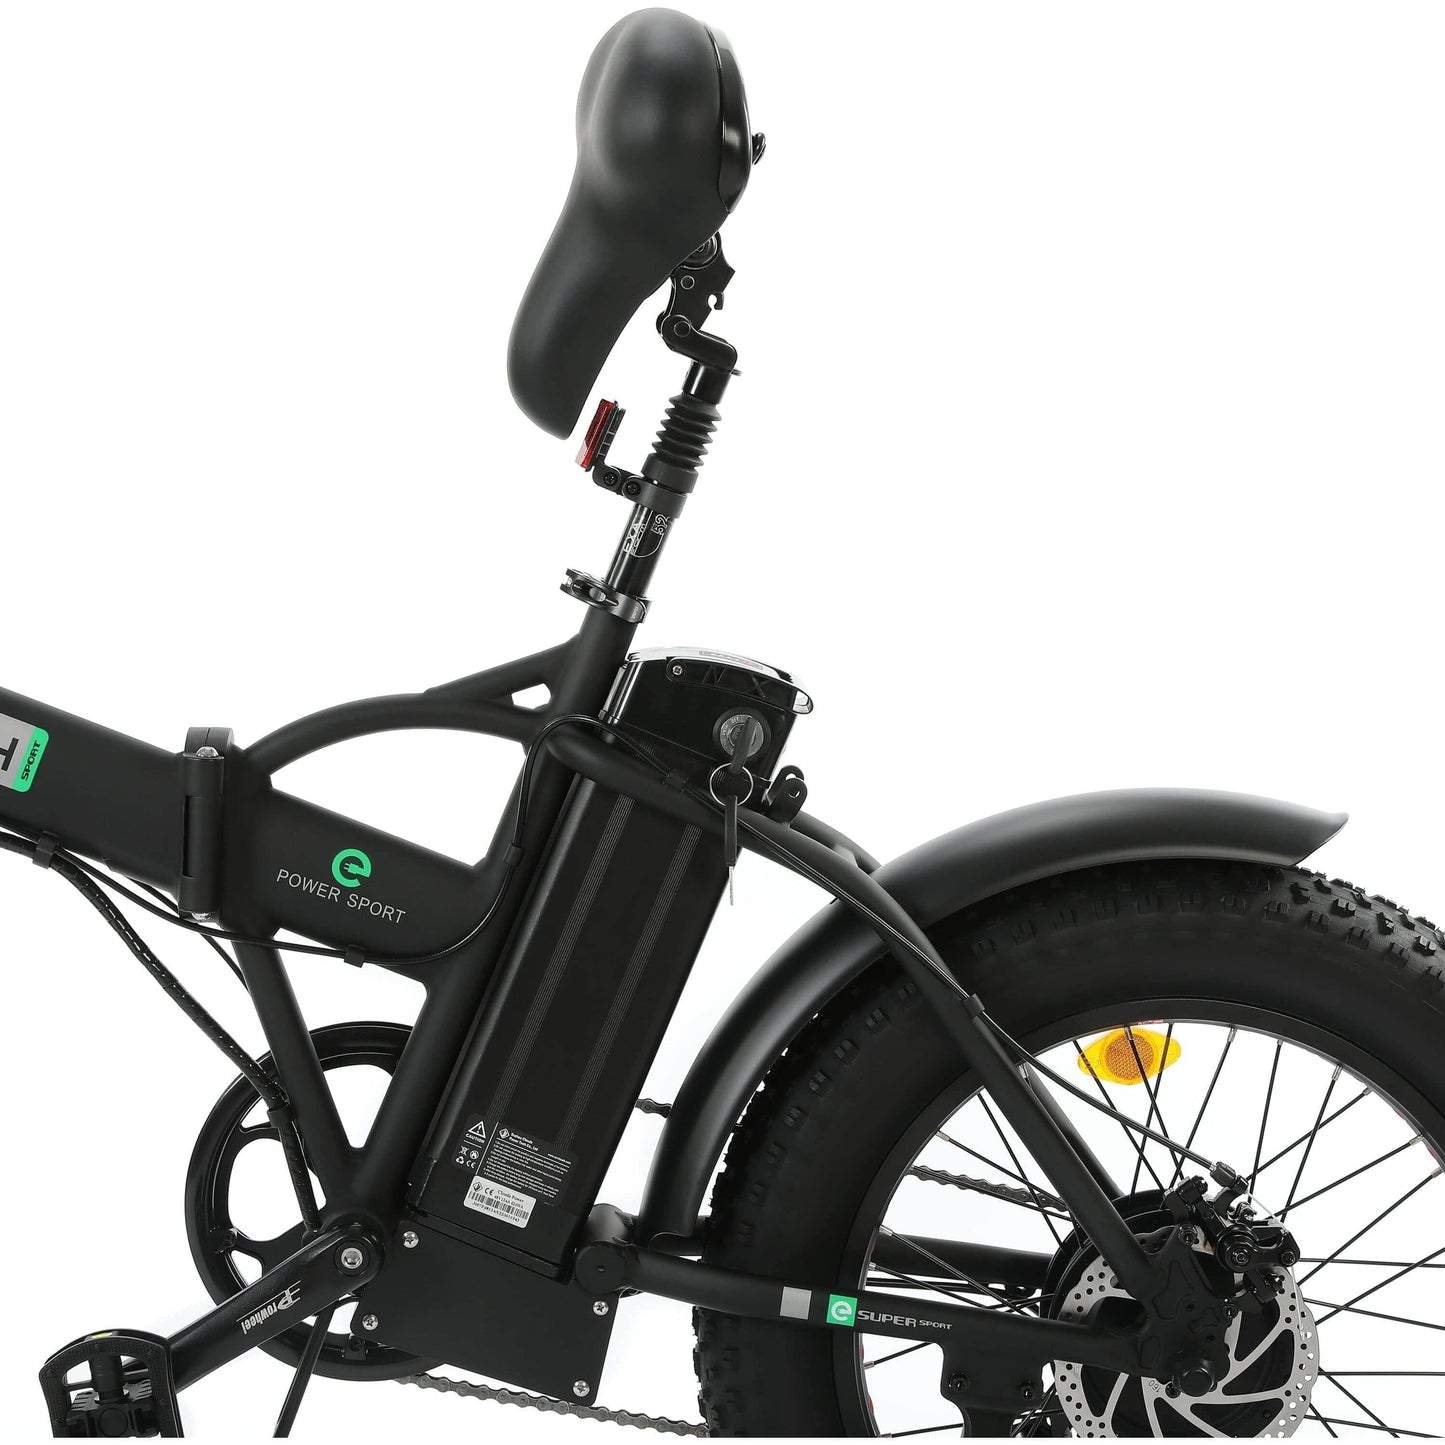 Ecotric ebikes Ecotric Matt Black 48V portable and folding fat ebike with LCD display